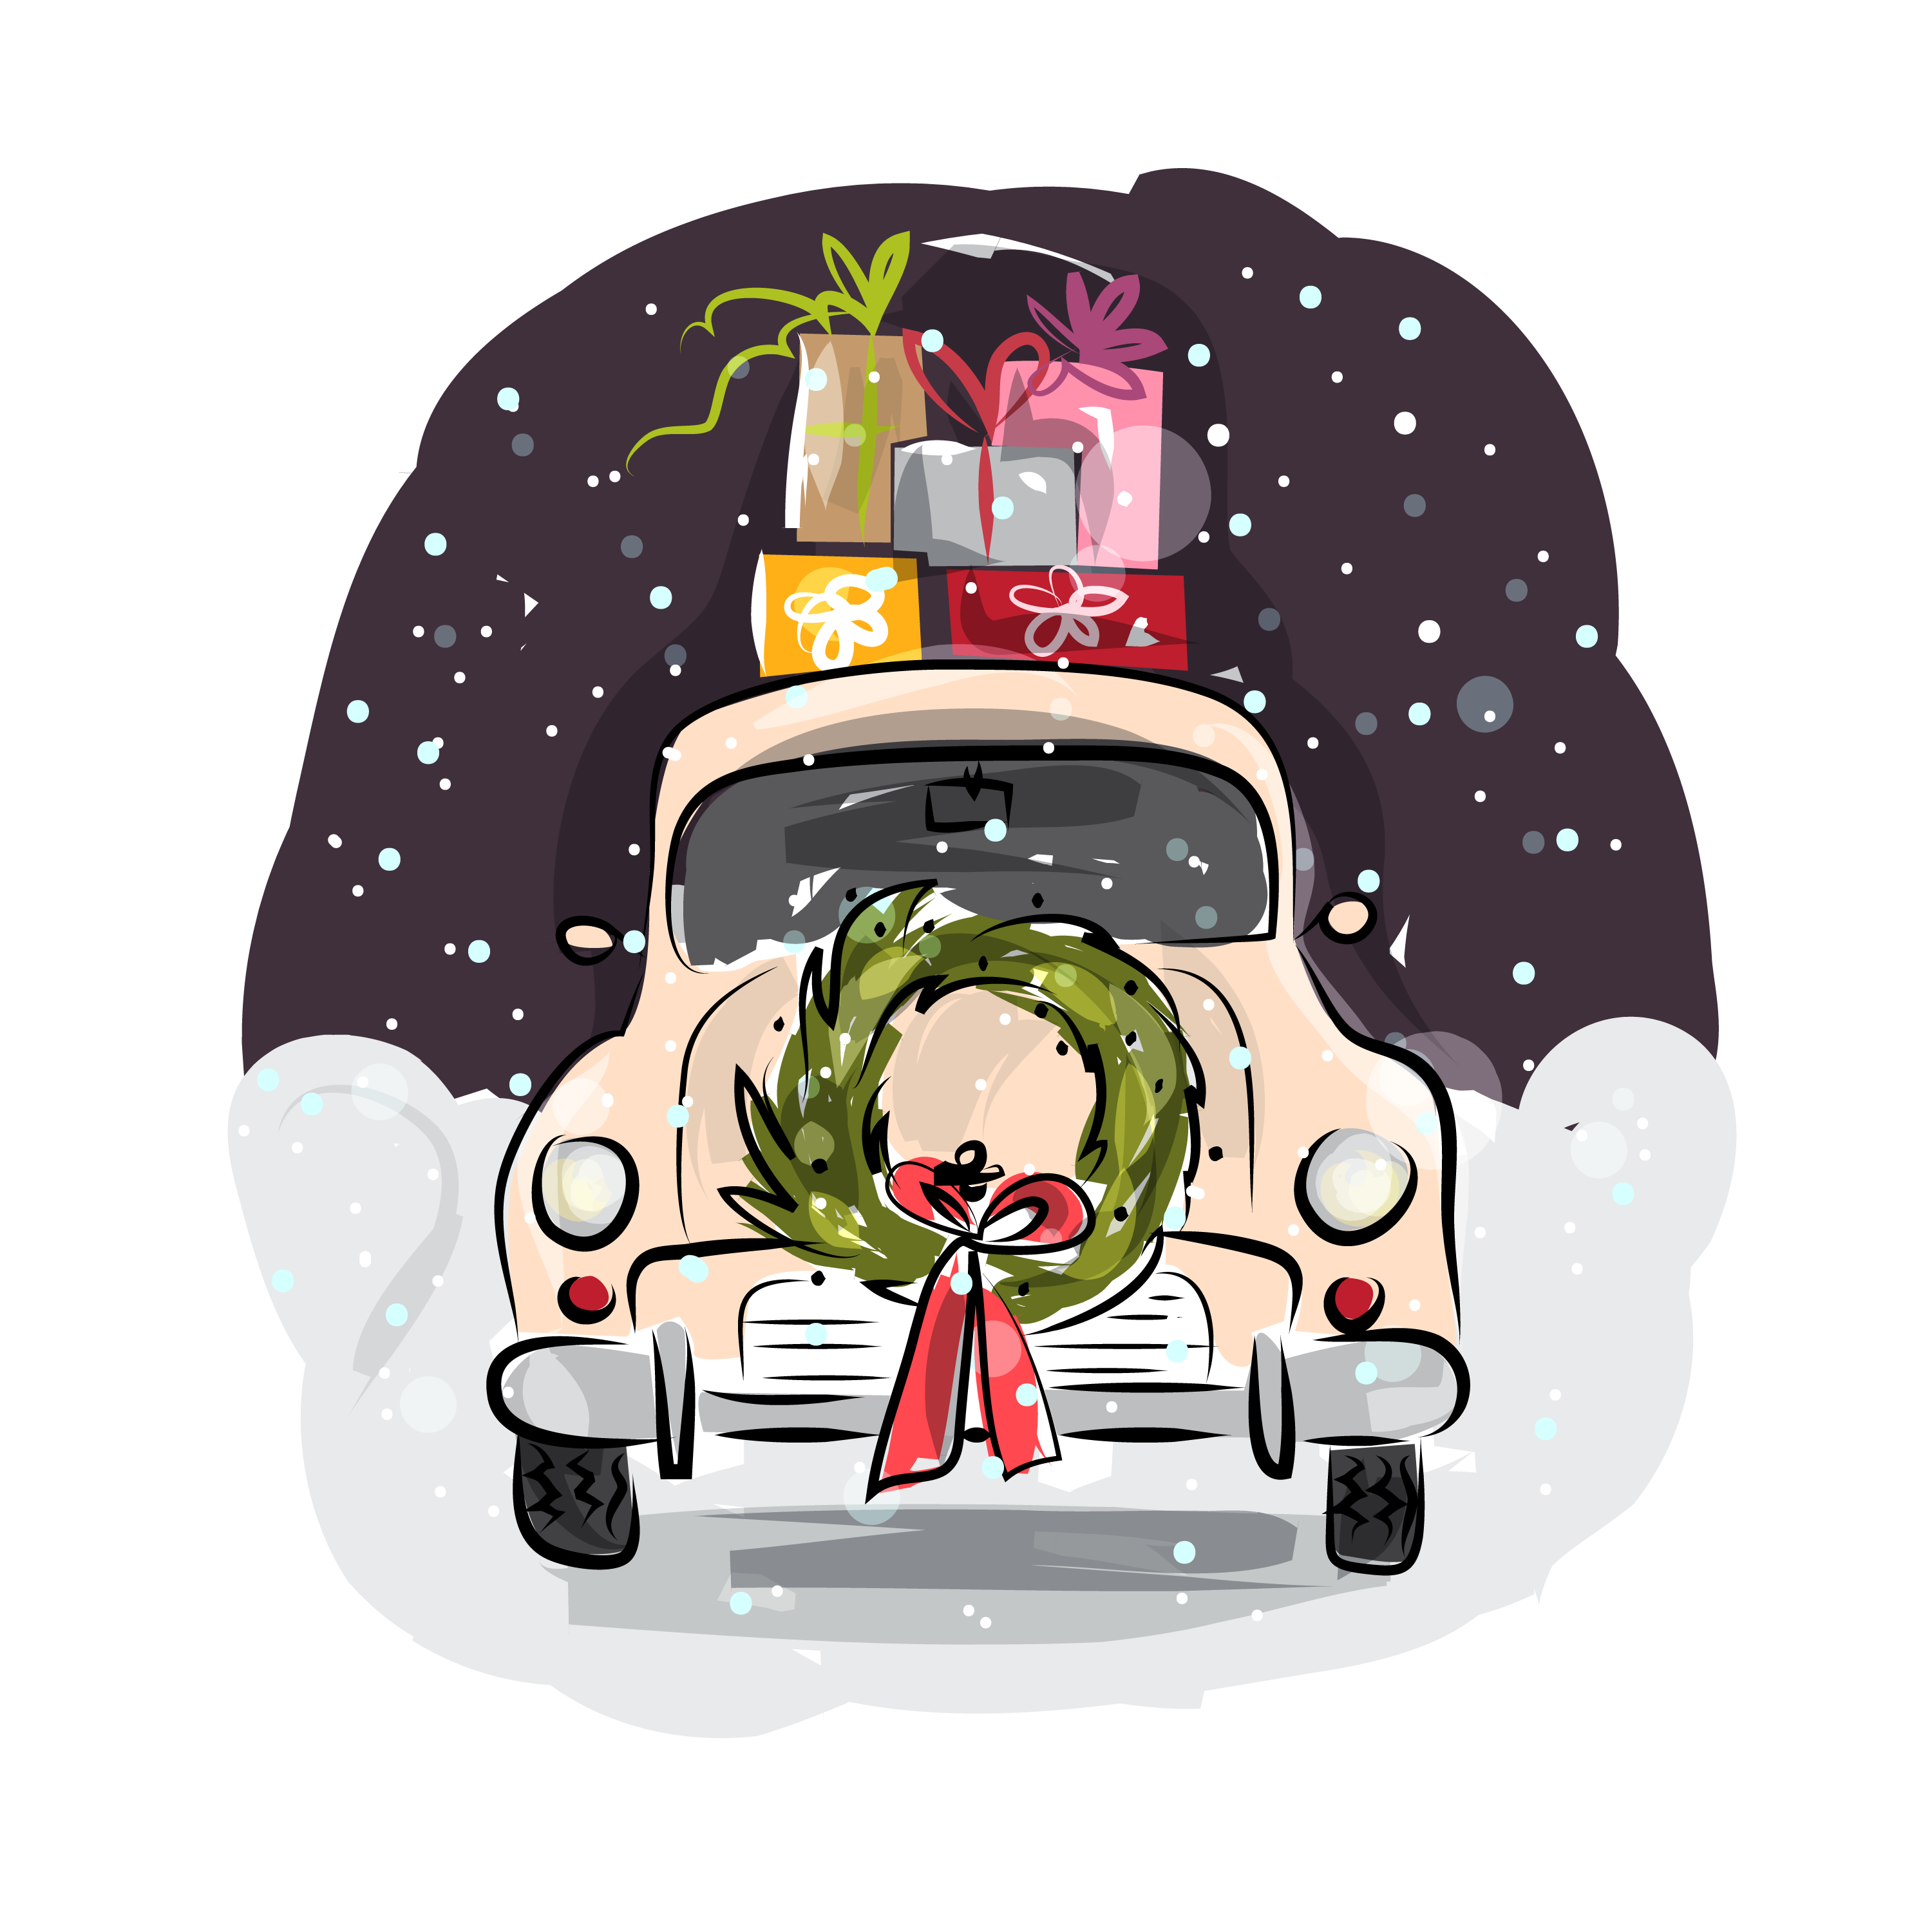 Festive Car Ready-to-Print Illustration Download for Personal Use